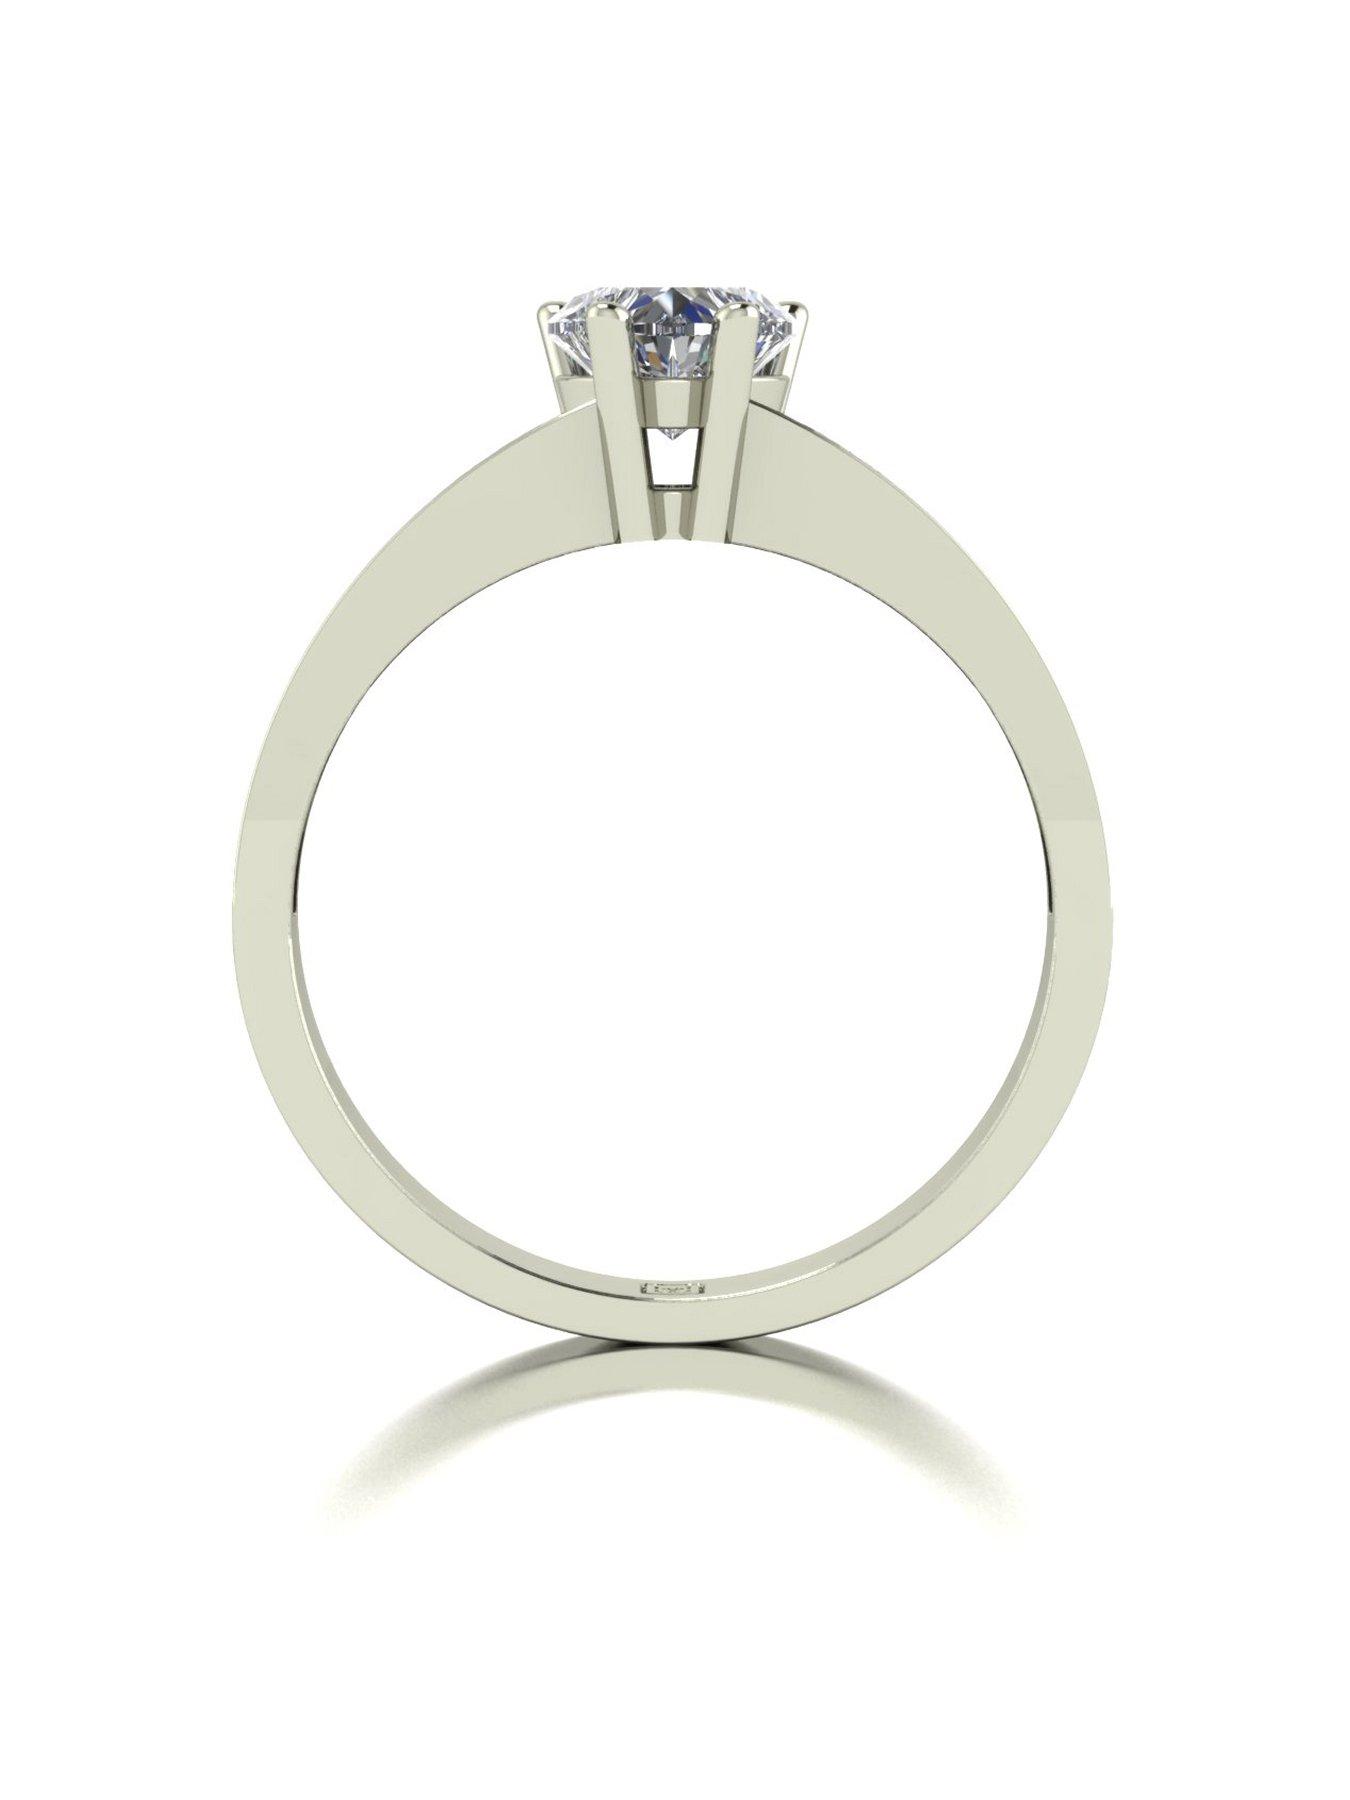  LADY LYNSEY MOISSANITE 9CT WHITE GOLD 1.30ct TOTAL HEART SOLITAIRE RING